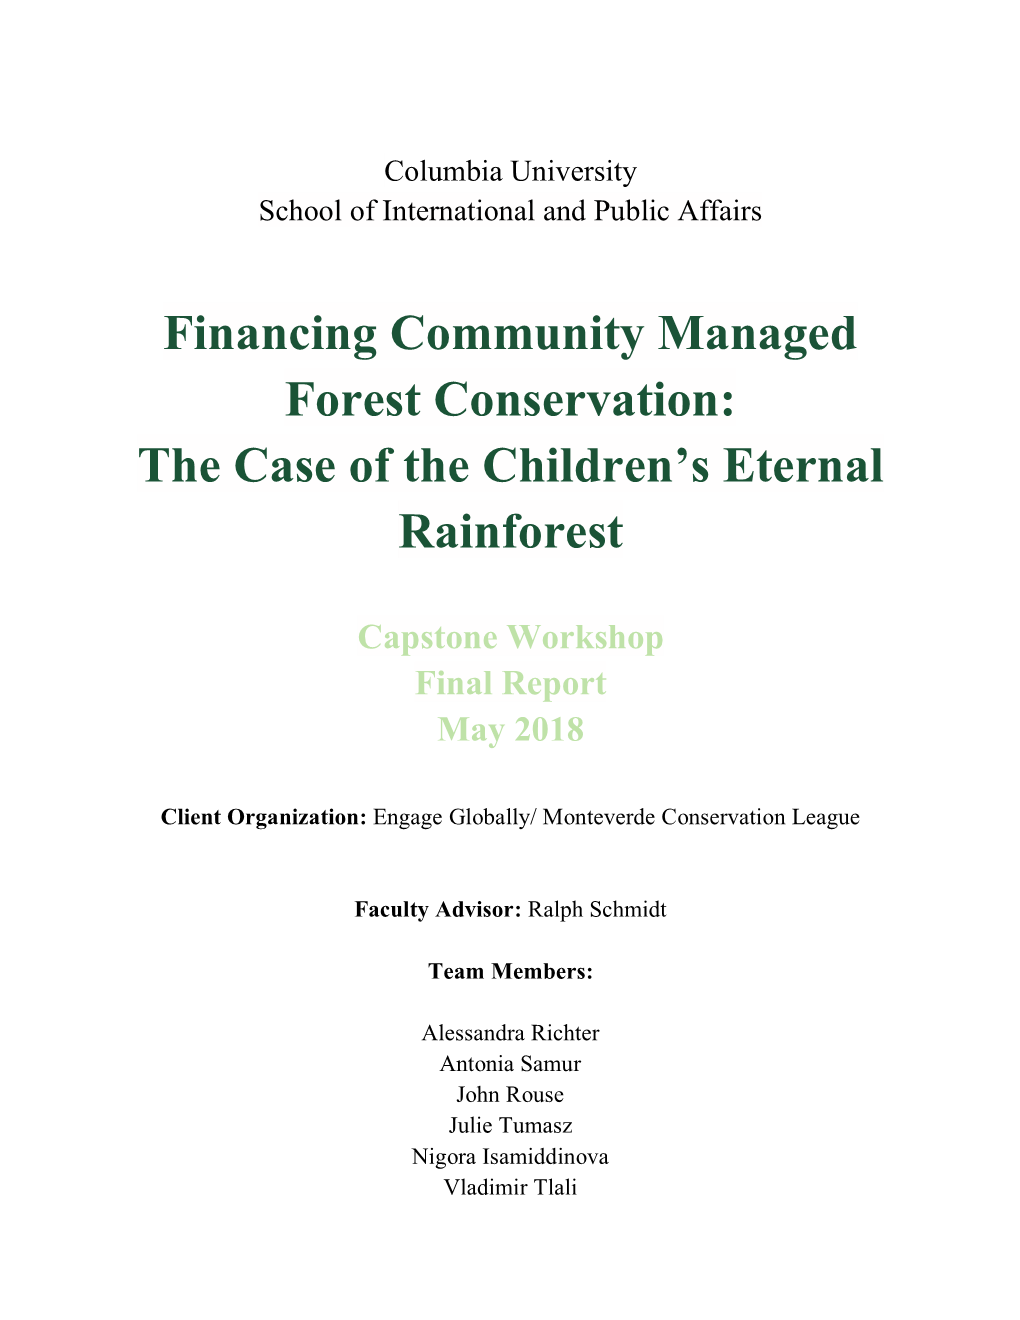 Financing Community Managed Forest Conservation: the Case of the Children's Eternal Rainforest